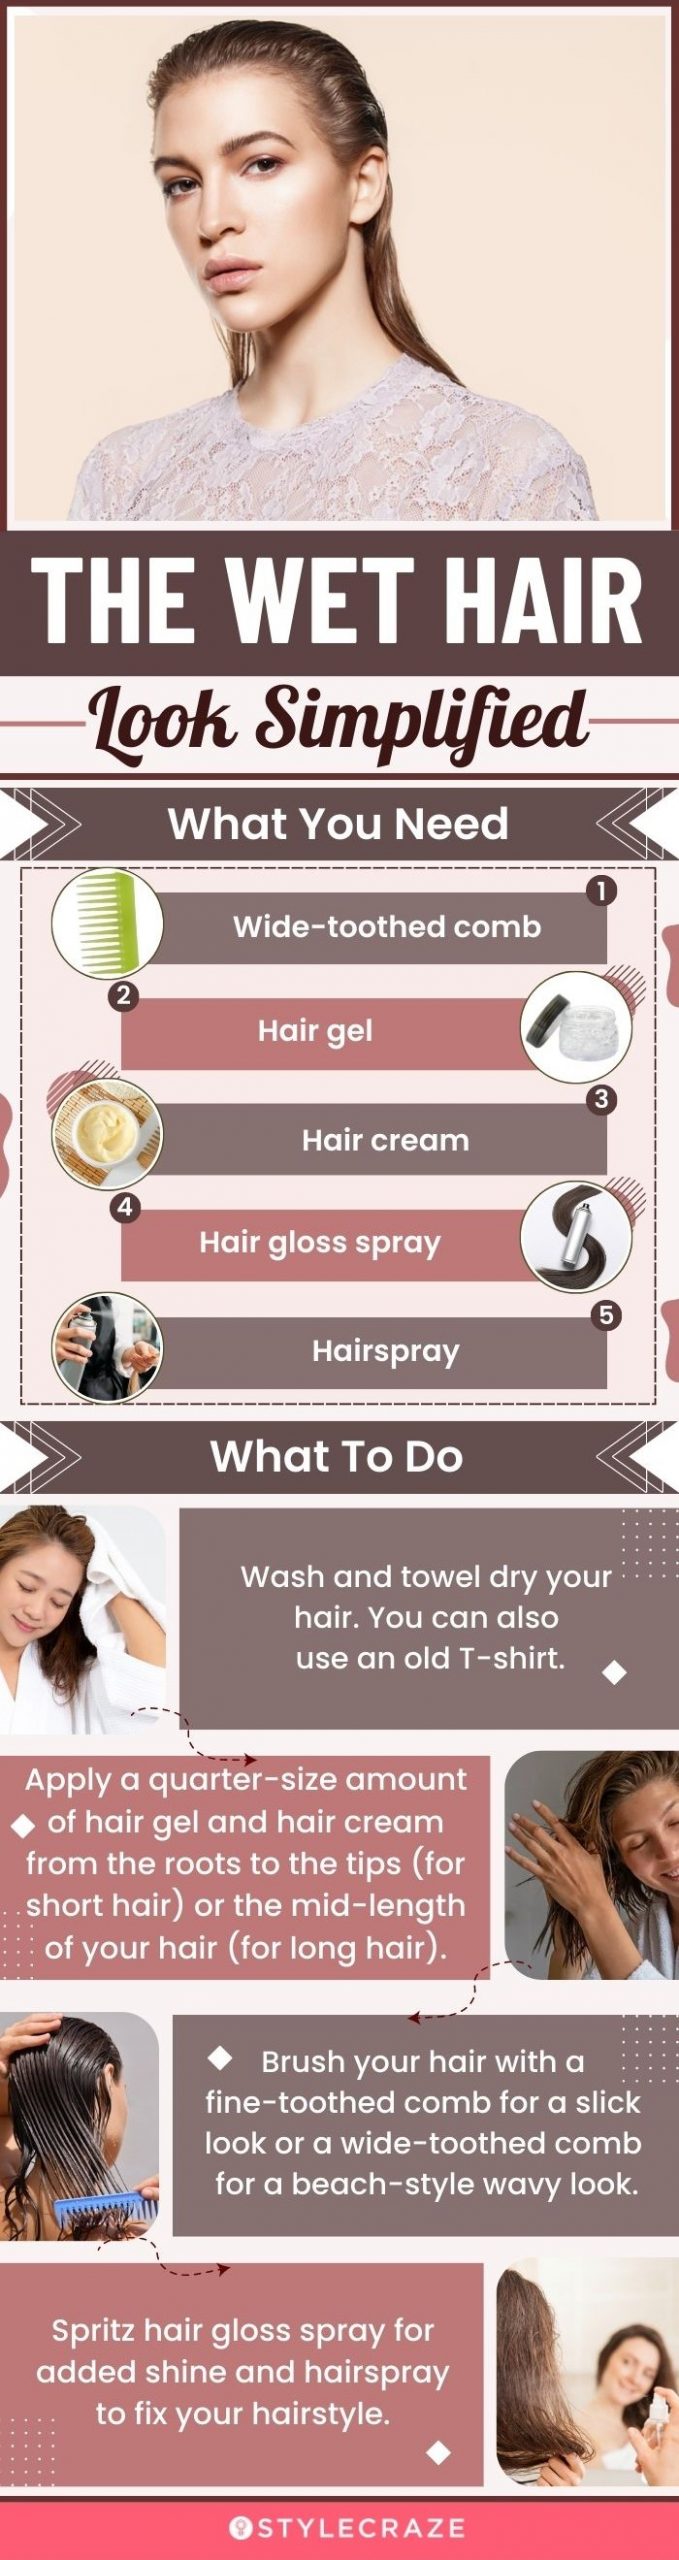 the wet hair look simplified(infographic)